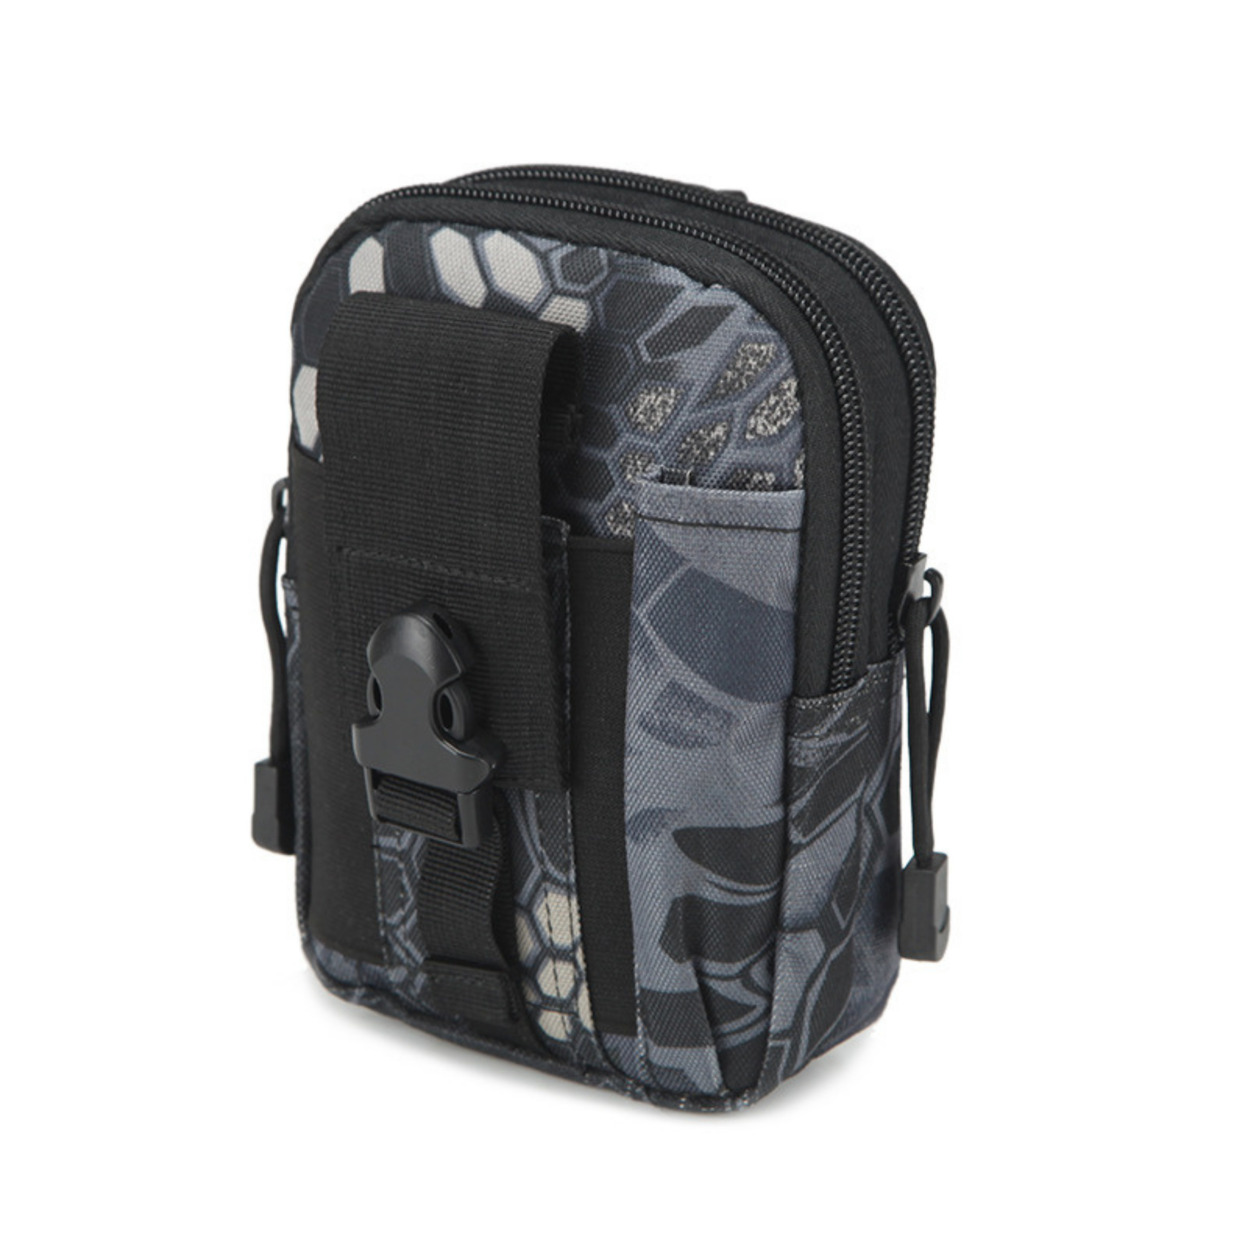 Tactical MOLLE Pouch & Waist Bag For Hiking & Outdoor Activities - Python